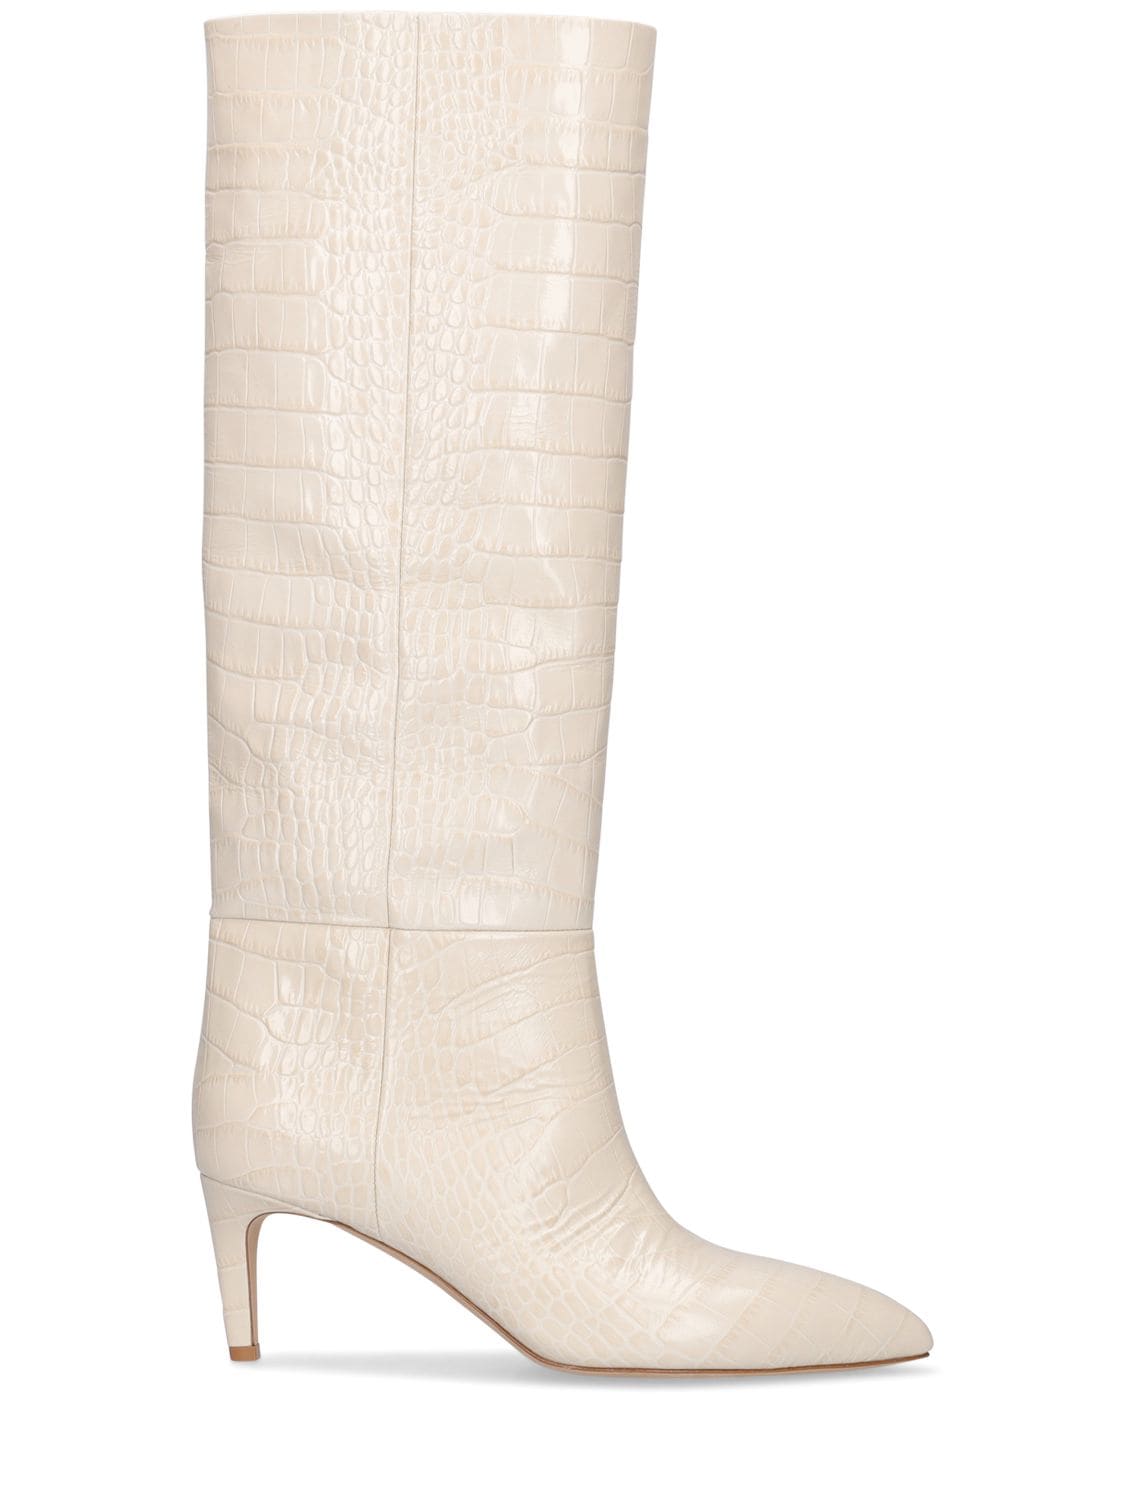 Paris Texas 60mm Croc Embossed Leather Tall Boots In Ivory